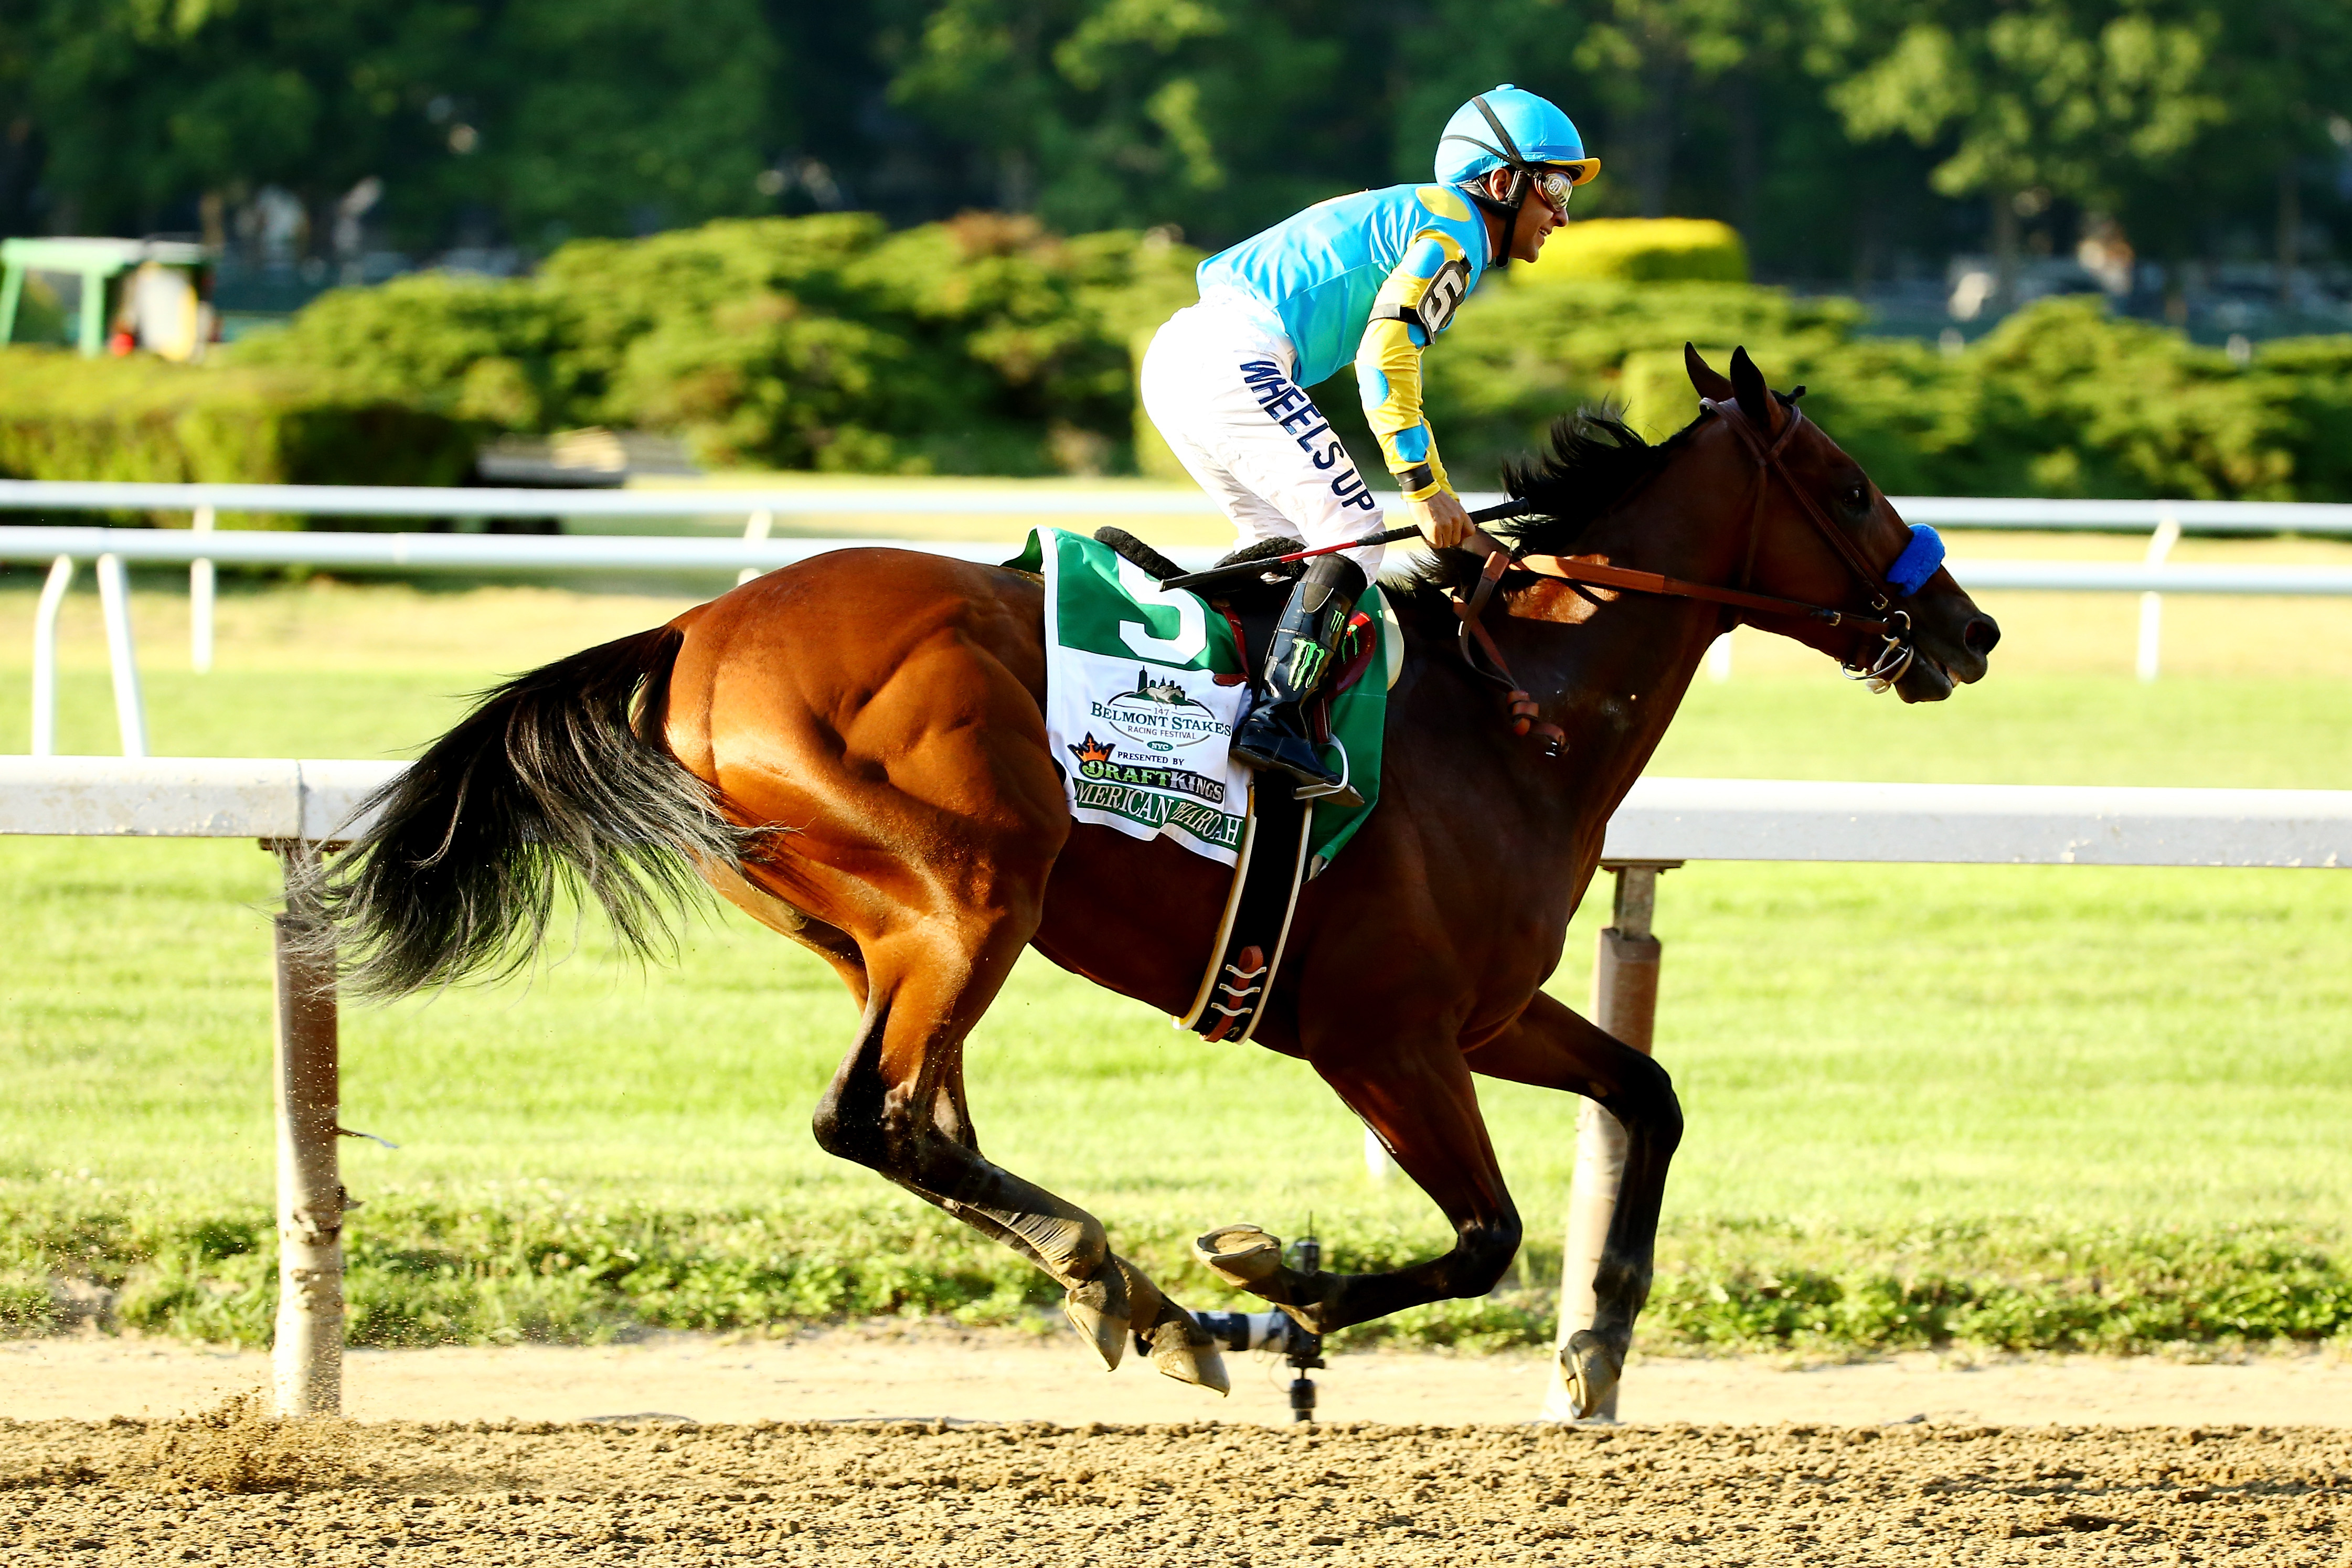 American Pharoah becomes the first horse to win the Triple Crown in 37 years. (Al Bello&mdash;Getty Images)